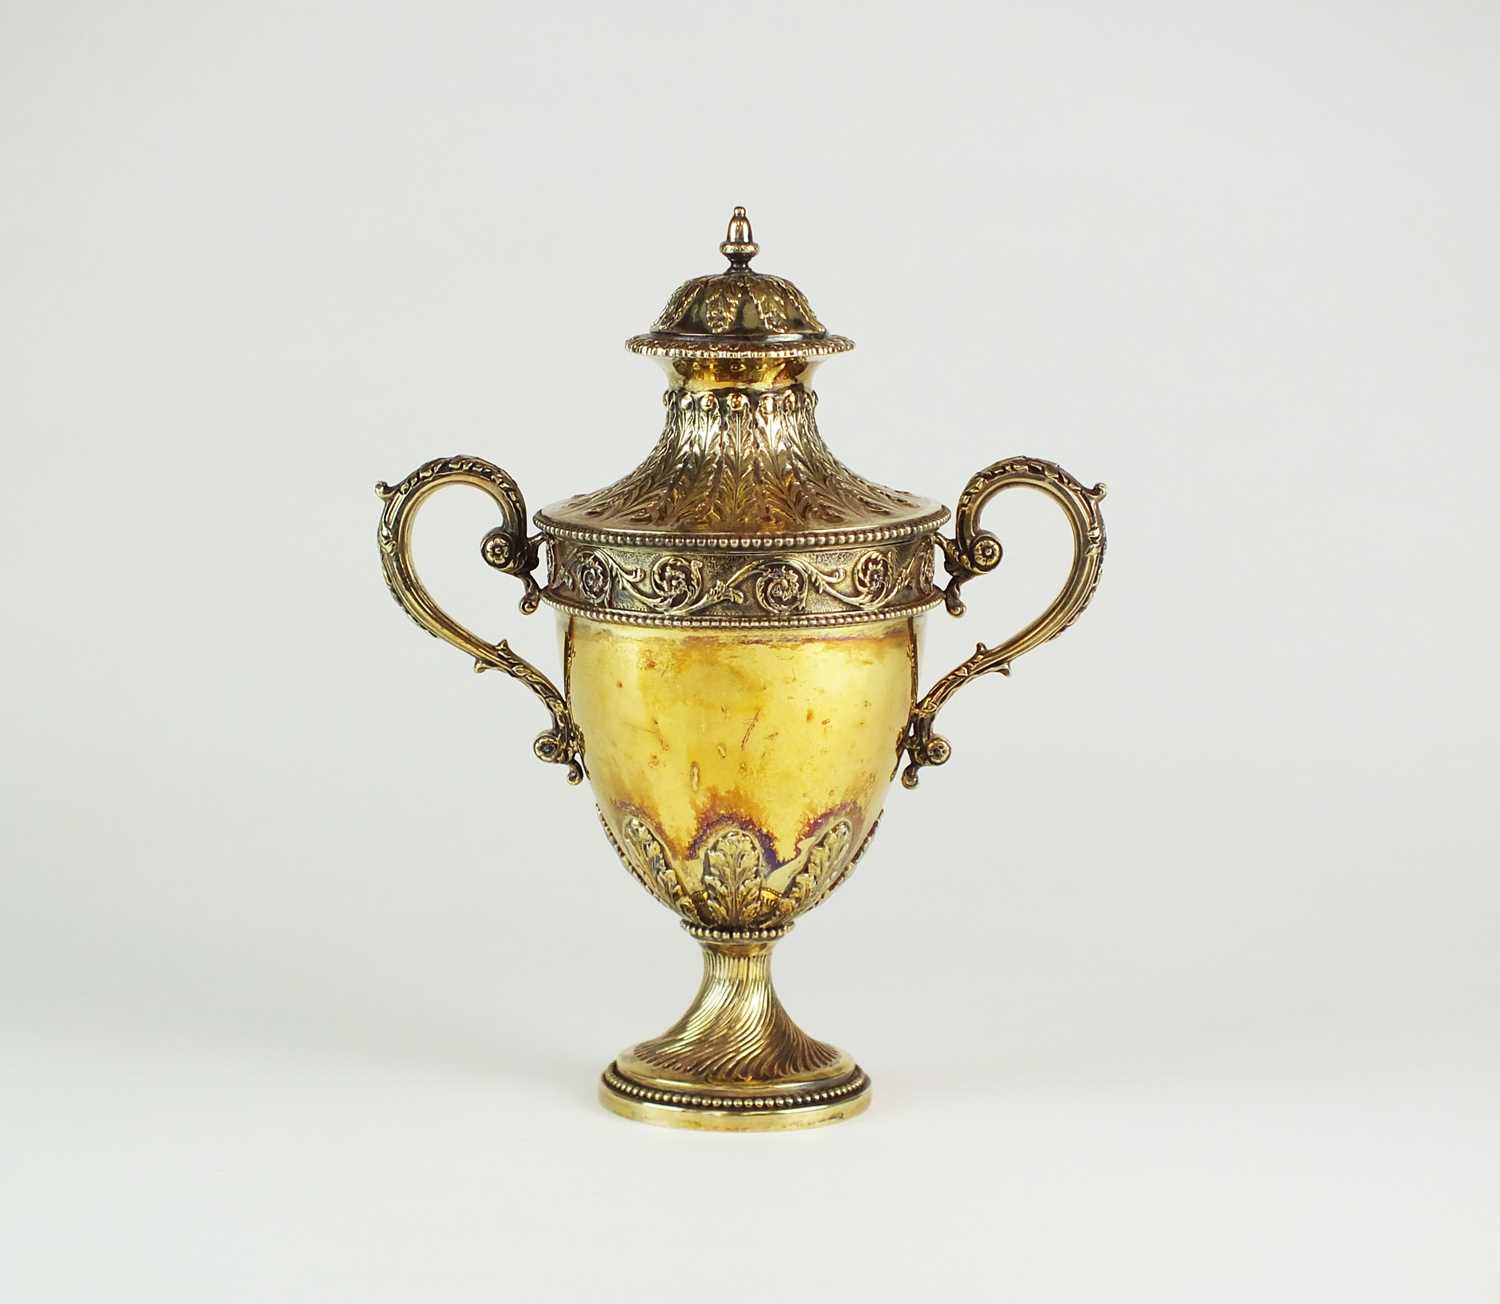 Lot 25 - A Victorian silver gilt two-handled cup and cover of urn form